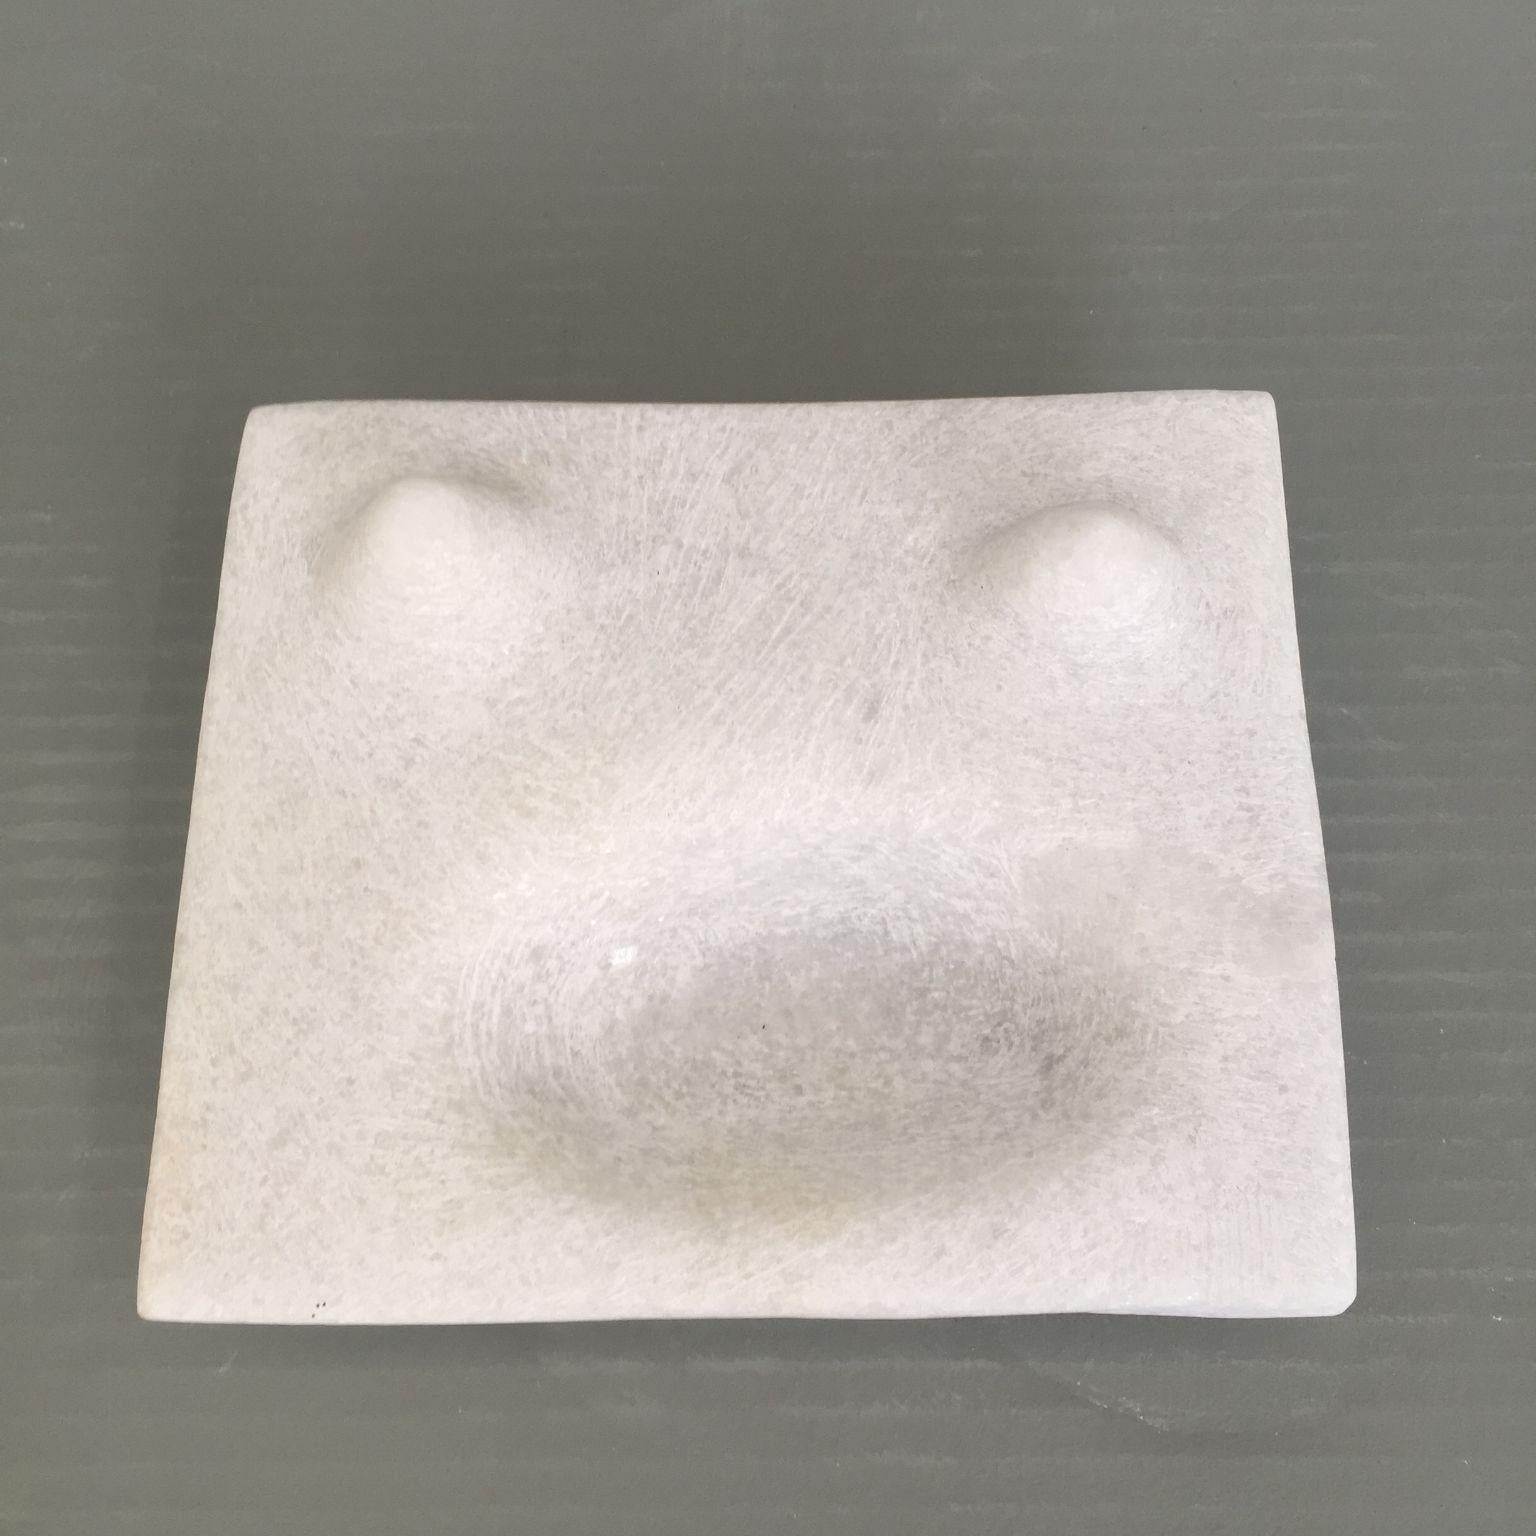 Cat face hand carved marble sculpture by Tom Von Kaenel
Dimensions: D14 x W16 x H4 cm
Materials: marble.

Tom von Kaenel, sculptor and painter, was born in Switzerland in 1961. Already in his early
childhood he was deeply devoted to art. His